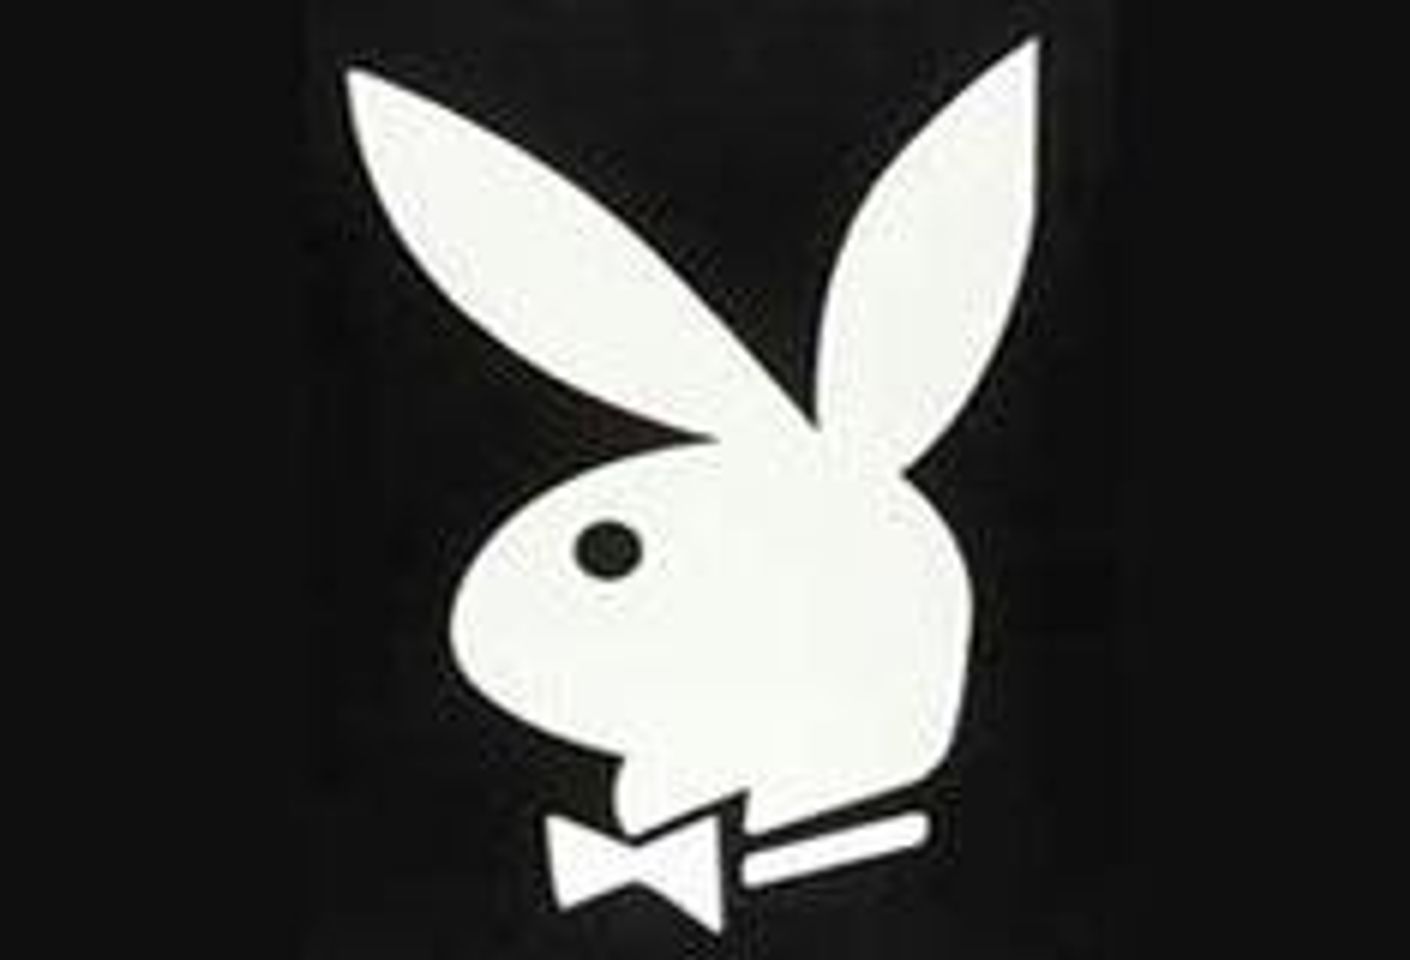 Playboy.com Searching for Girls of the Gap